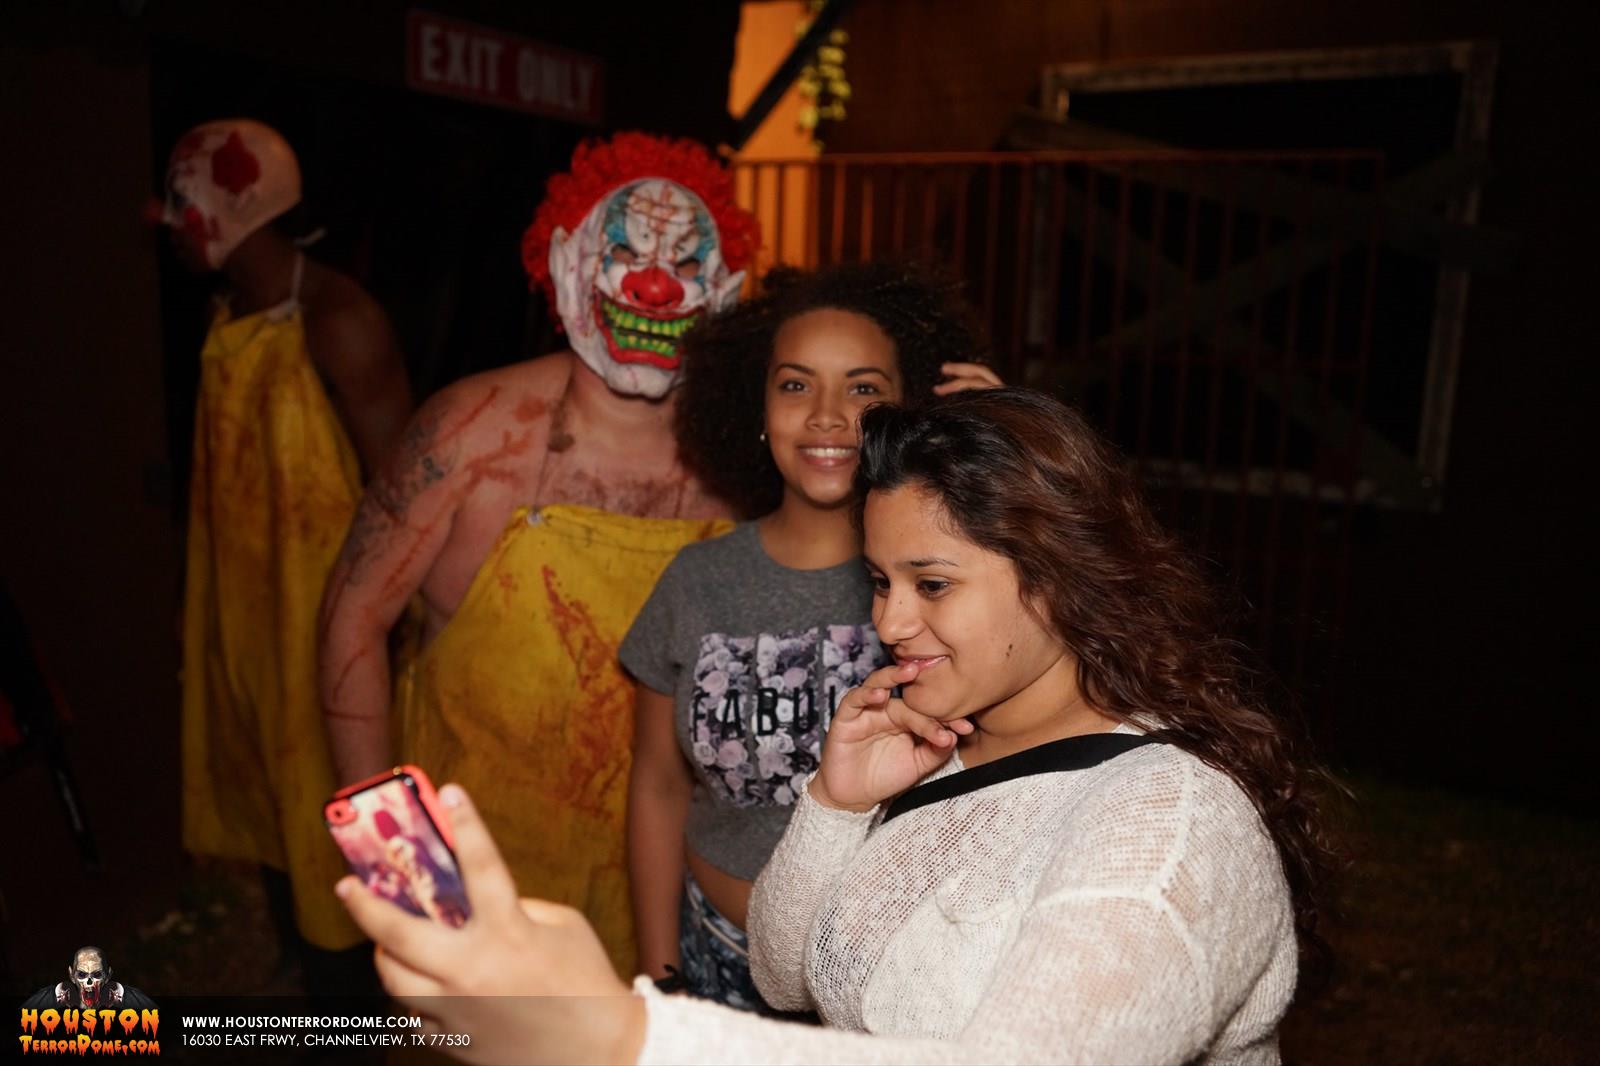 Selfies with the evil clown.